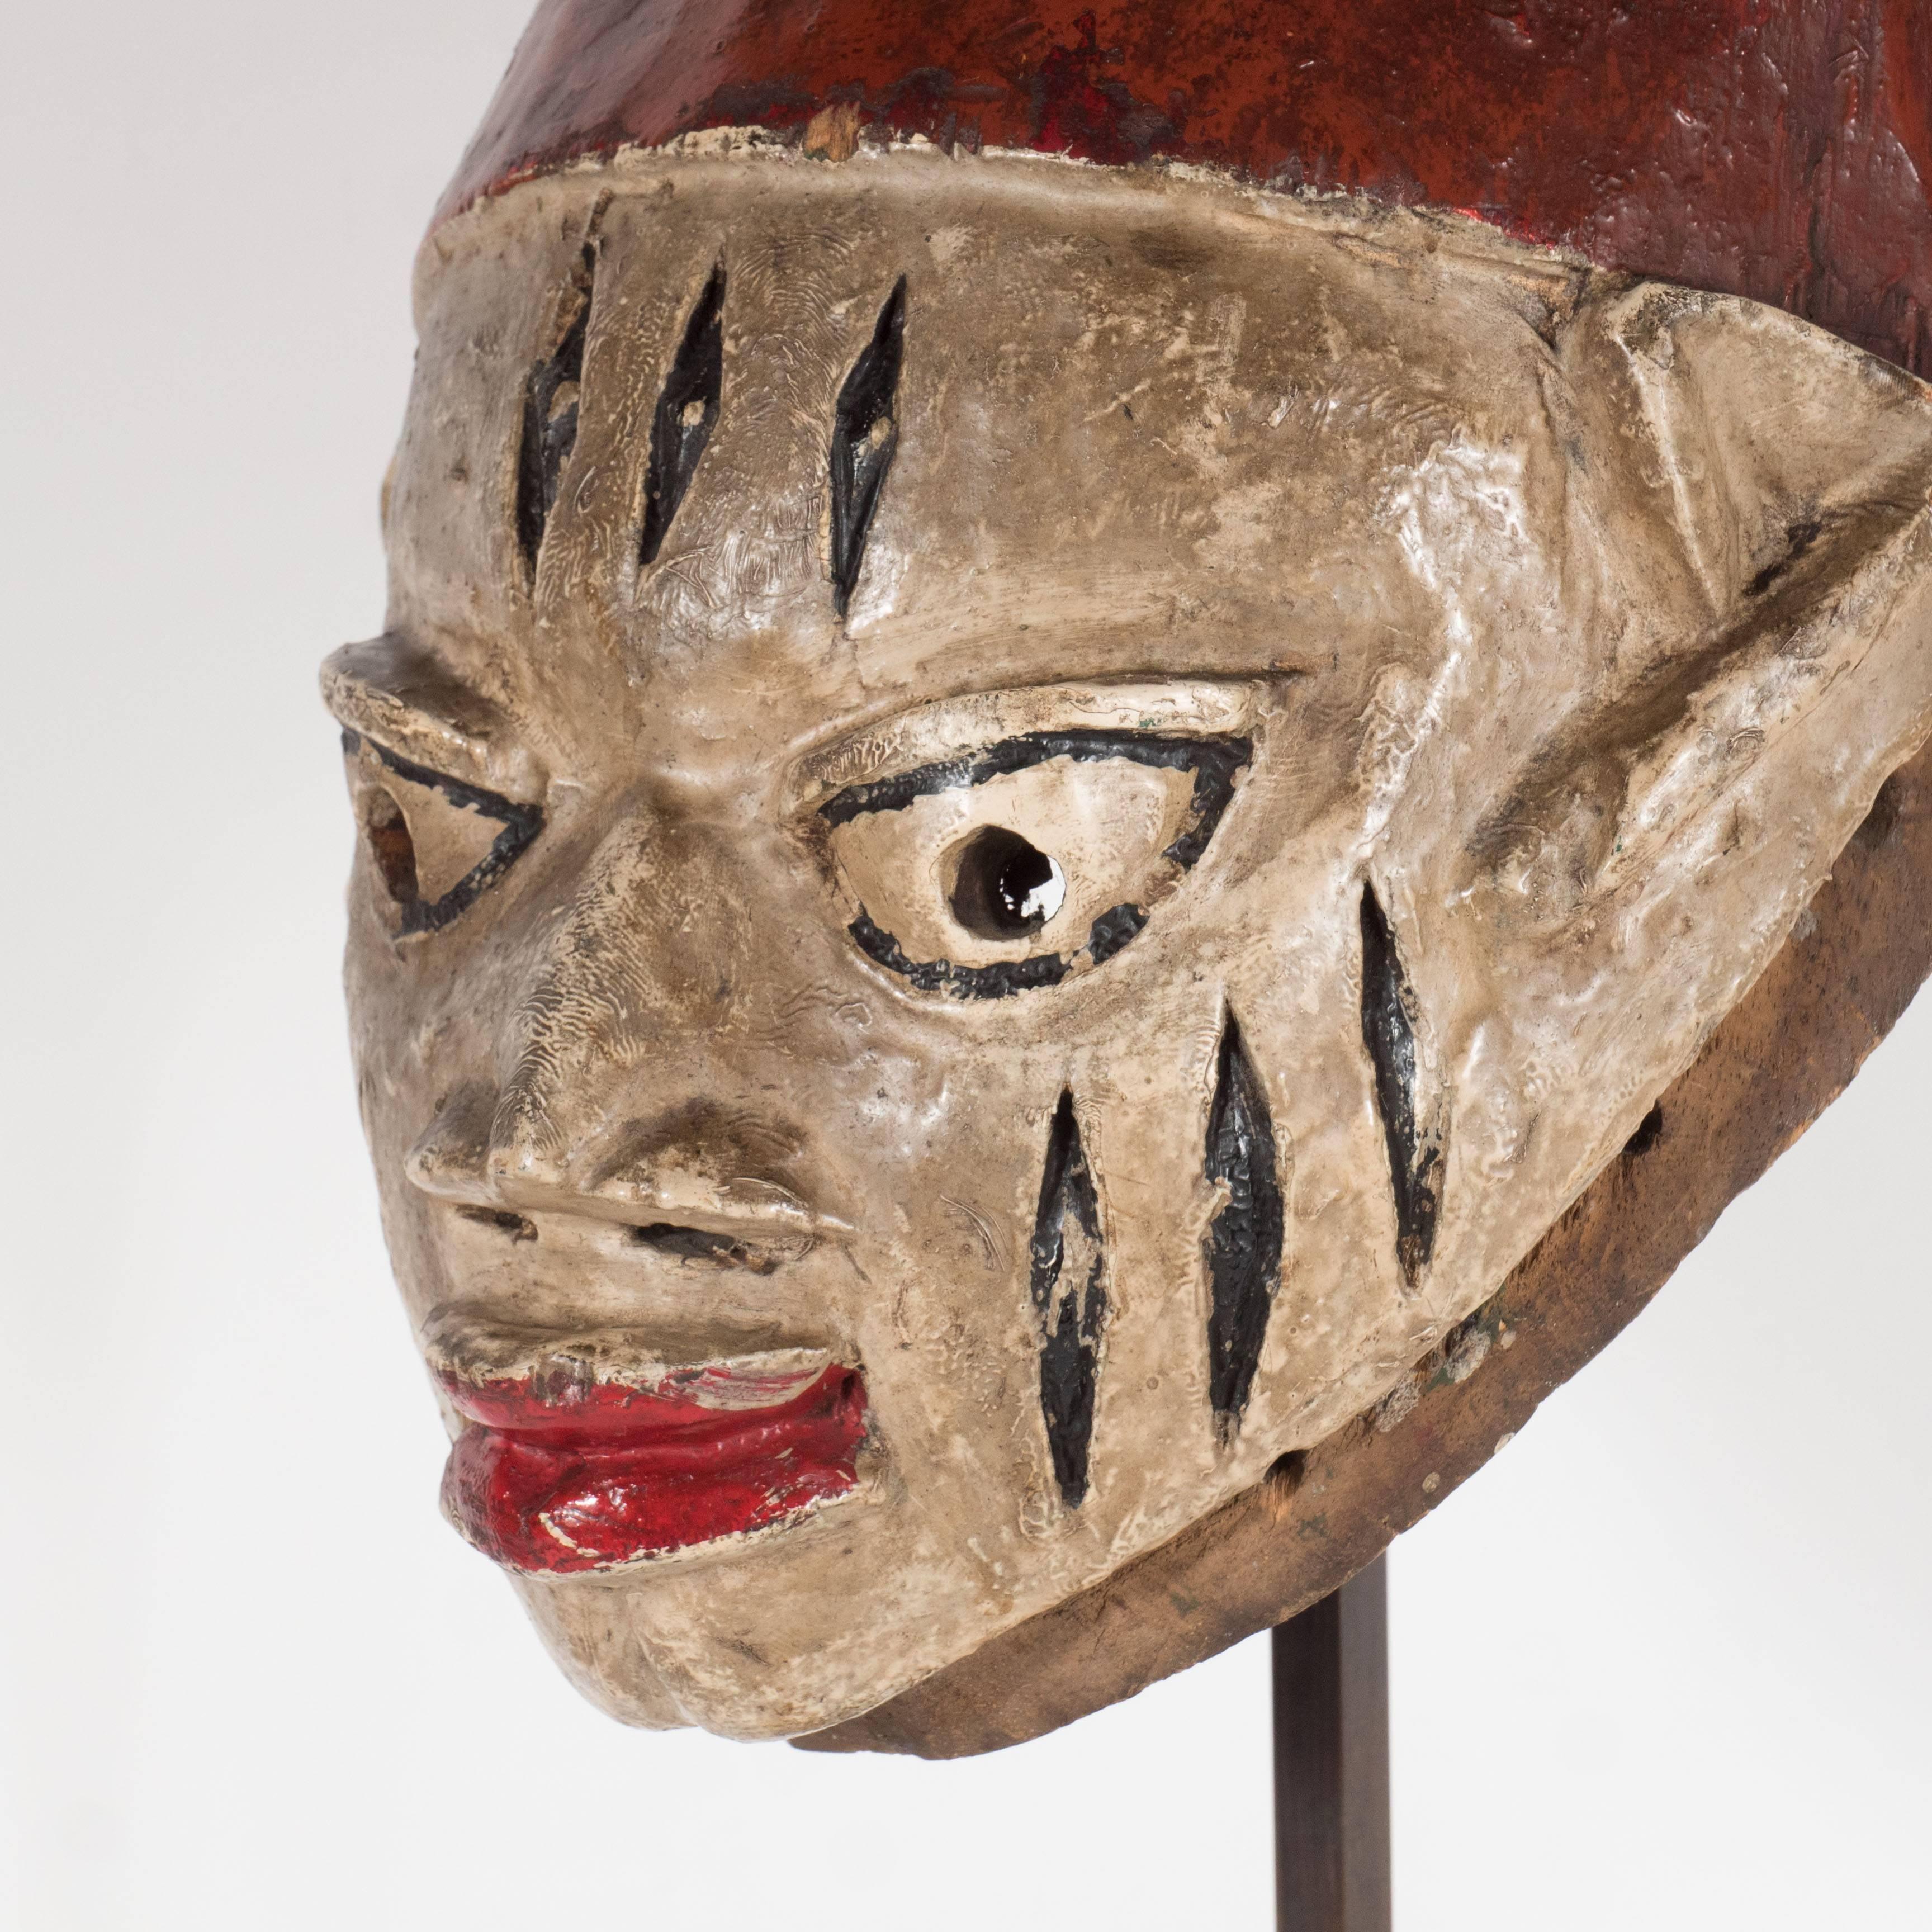 A painted head crest mask which appears to be from a 'Gelede cult,' known for honoring women and fertility, in the state of Benin (formerly Dahomey) in Nigeria, 20th century. This bust features three sets of vertical striations on the figure's